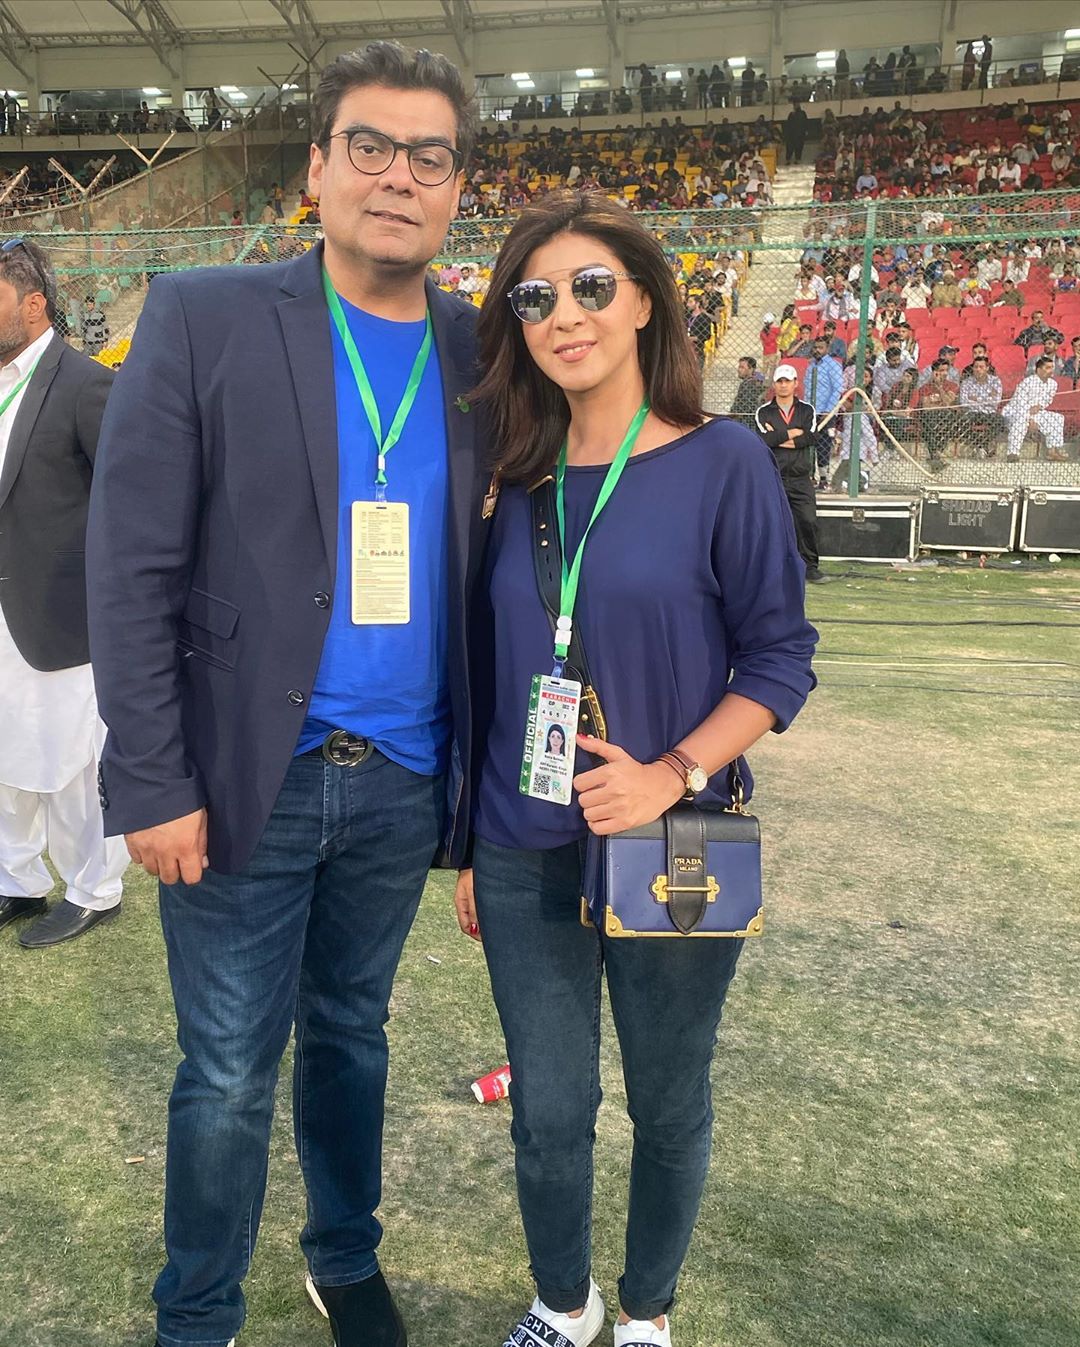 Celebrities Spotted at Karachi Stadium to Support Karachi Kings in PSL